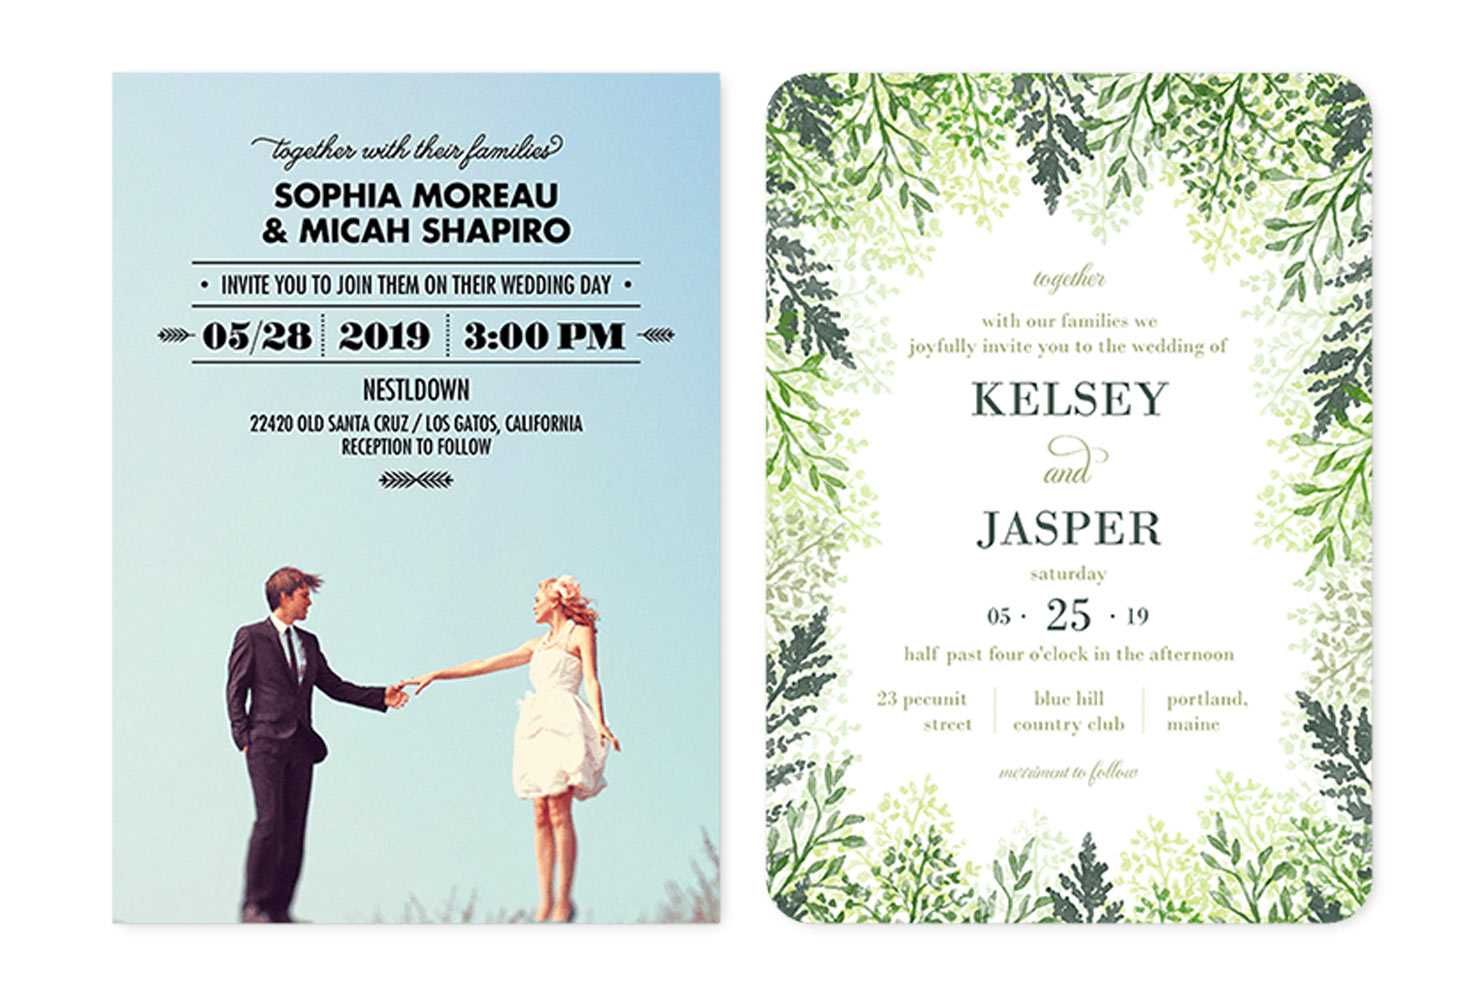 35+ Wedding Invitation Wording Examples 2020 | Shutterfly Throughout Sample Wedding Invitation Cards Templates